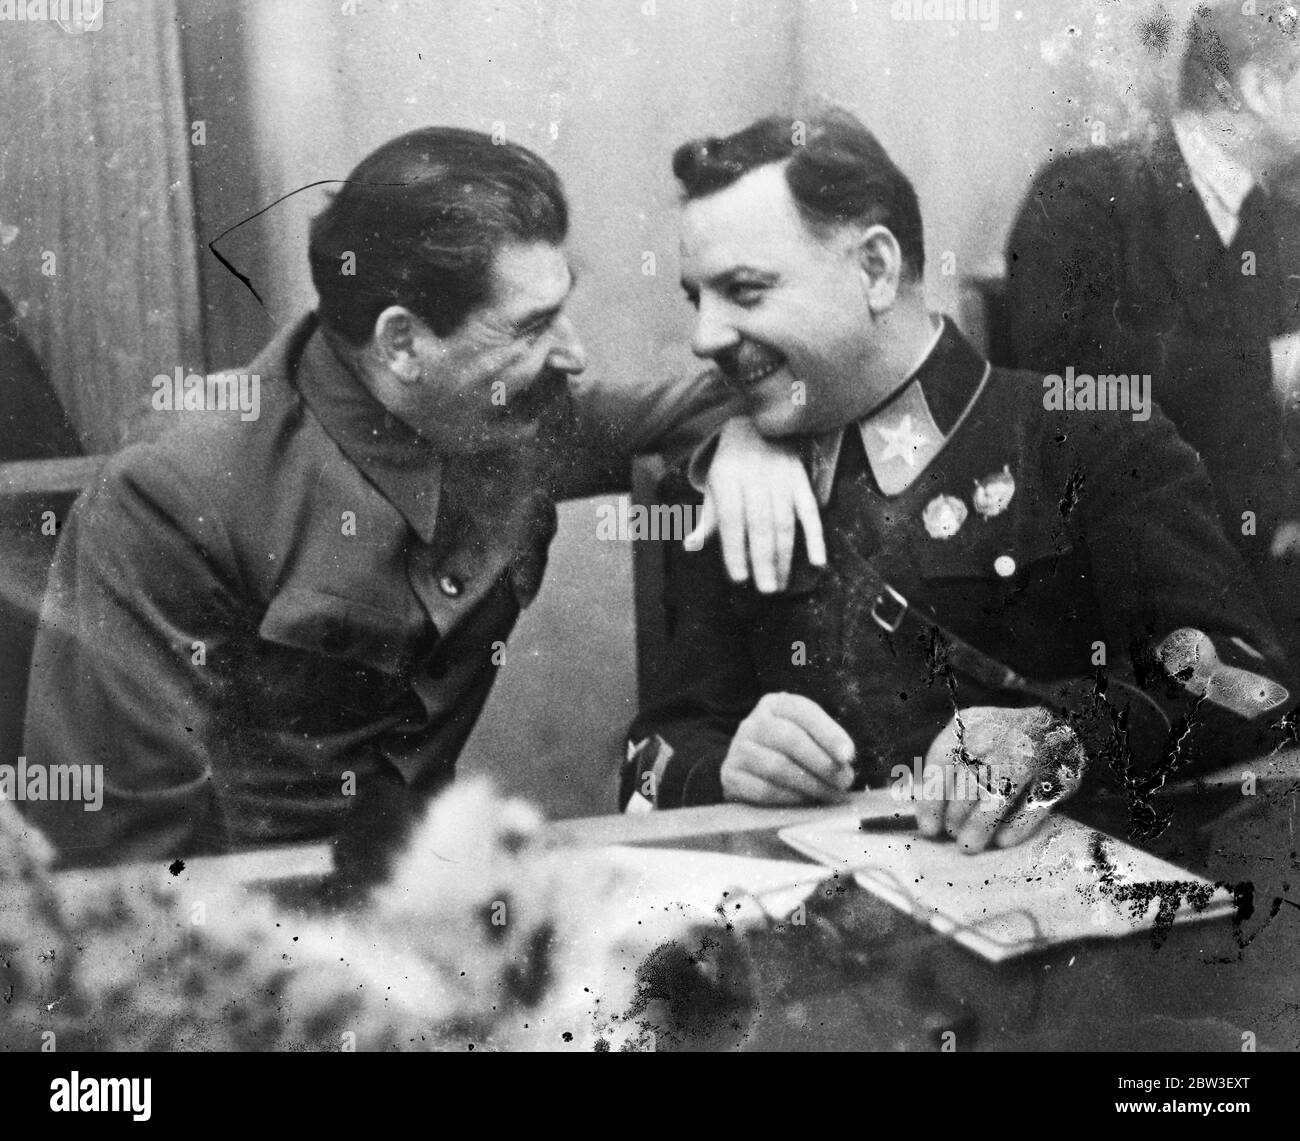 Stalin ' s little joke . M Stalin , the Soviet dictator , resting his arm on the shoulder of K E Veroshilov , Defence Commissar , as they laughed together at a collective farmers conference in Moscow . M Voroshilov is making his first appearance in the uniform of a Marshal of the Soviet Union . , the rank to which he was recently promoted . This uniform is more ornate than is used in Russia . It bears a large gold embroided star on red collar patches and a large gold embroidered star and gold stripes on the cuff . 27 December 1935 Stock Photo